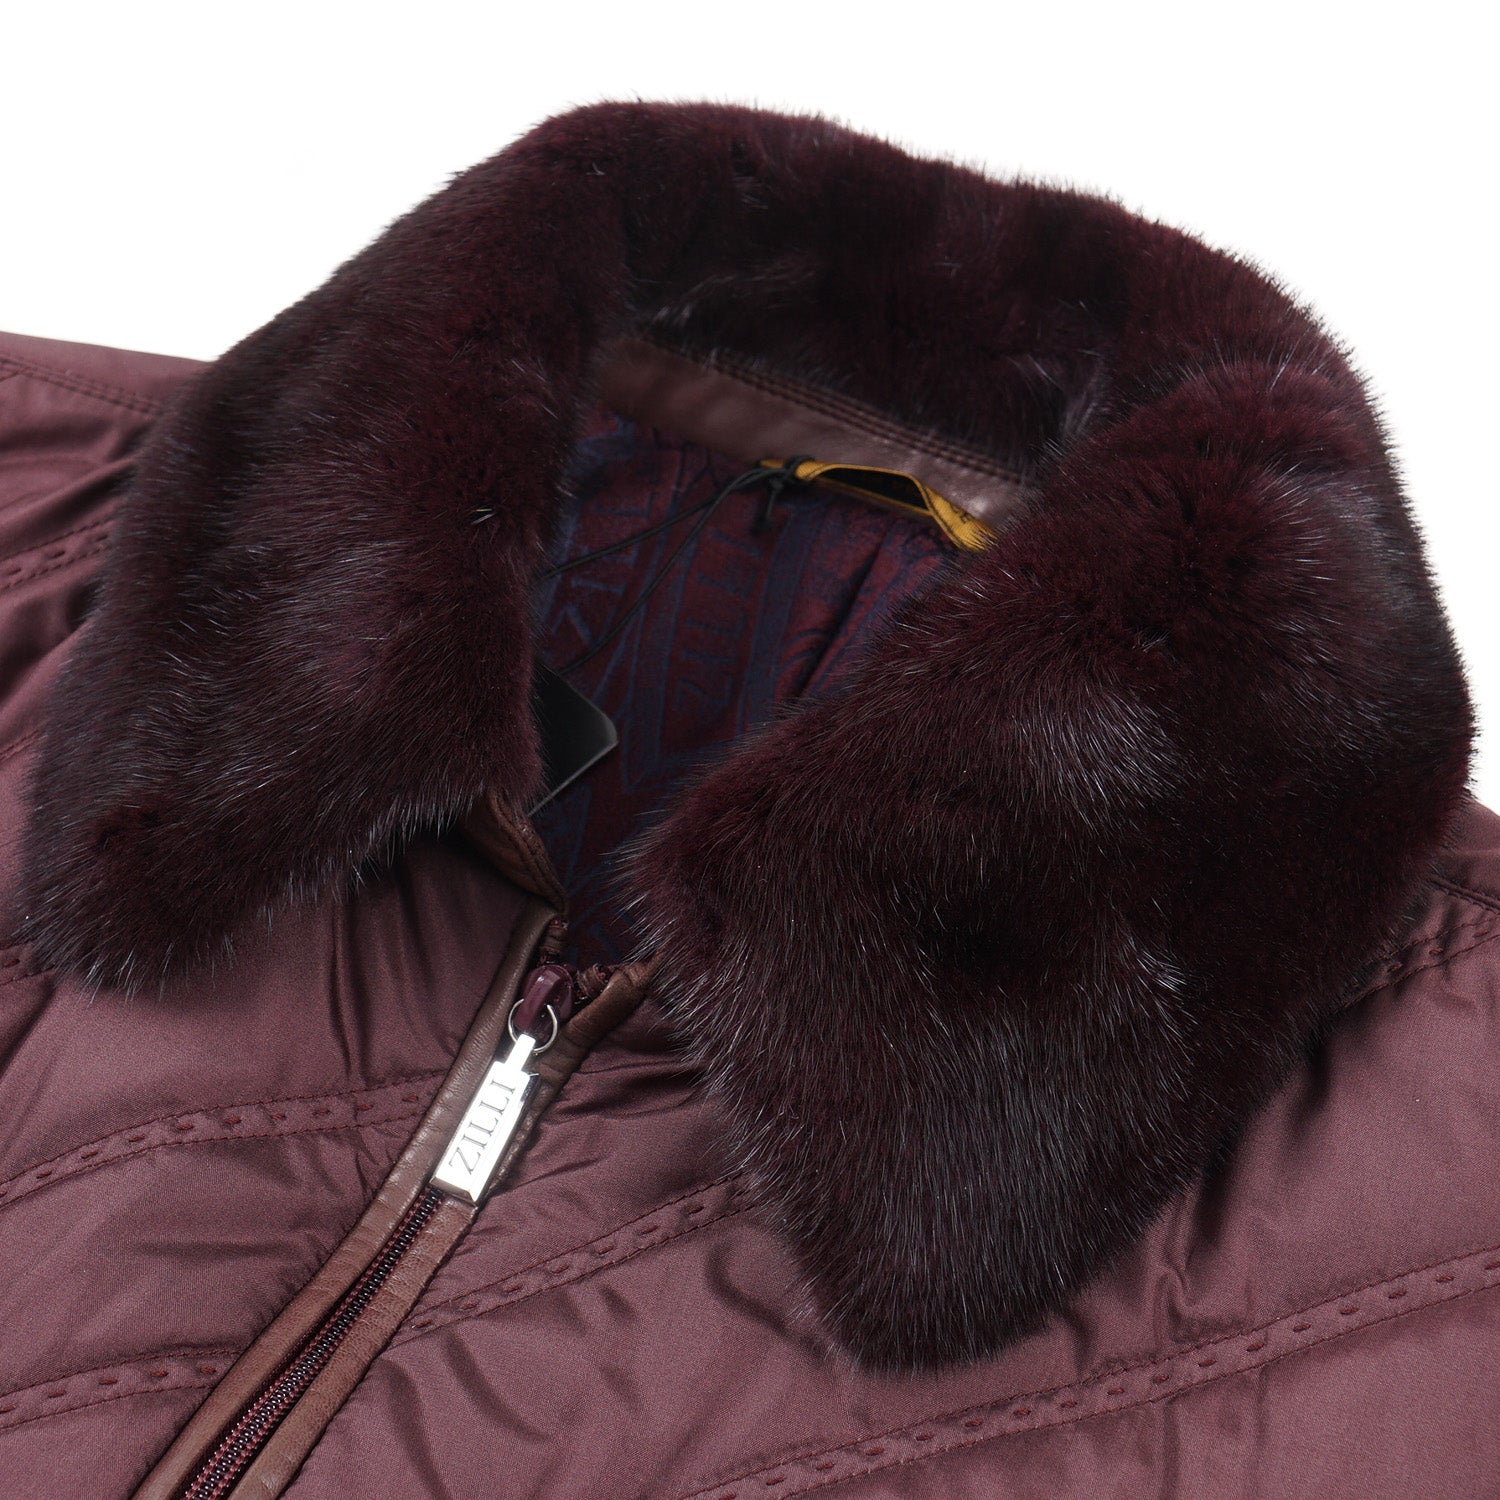 Zilli Quilted Silk Down Jacket with Mink Collar - Top Shelf Apparel